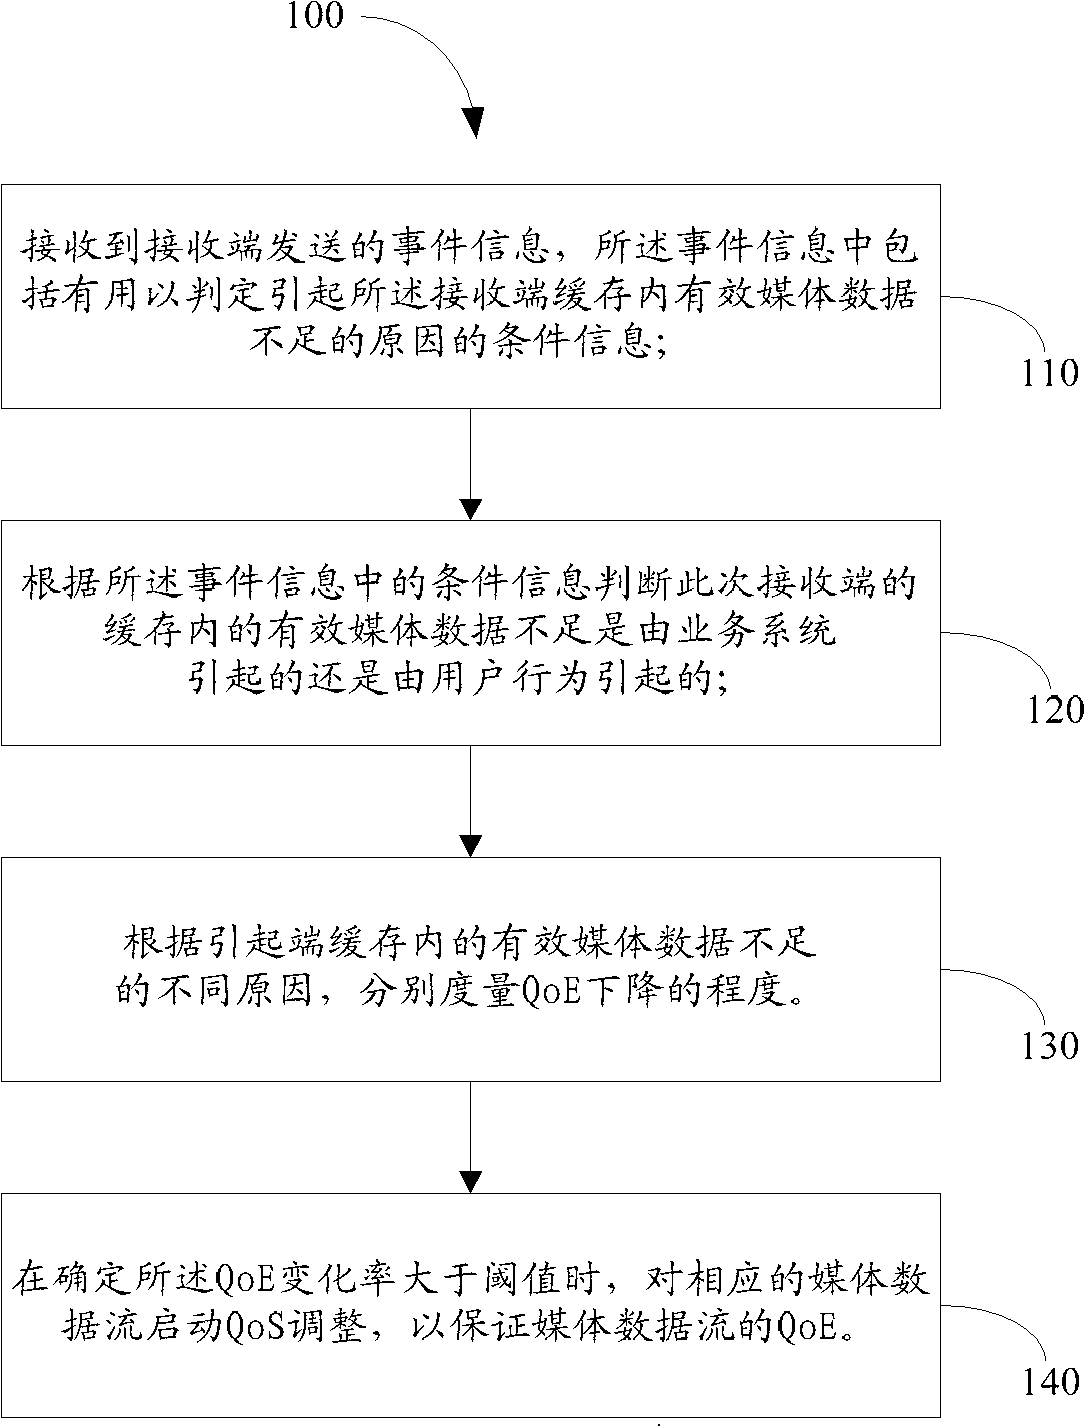 Method and device for measuring user QoE (Quality of Experience)